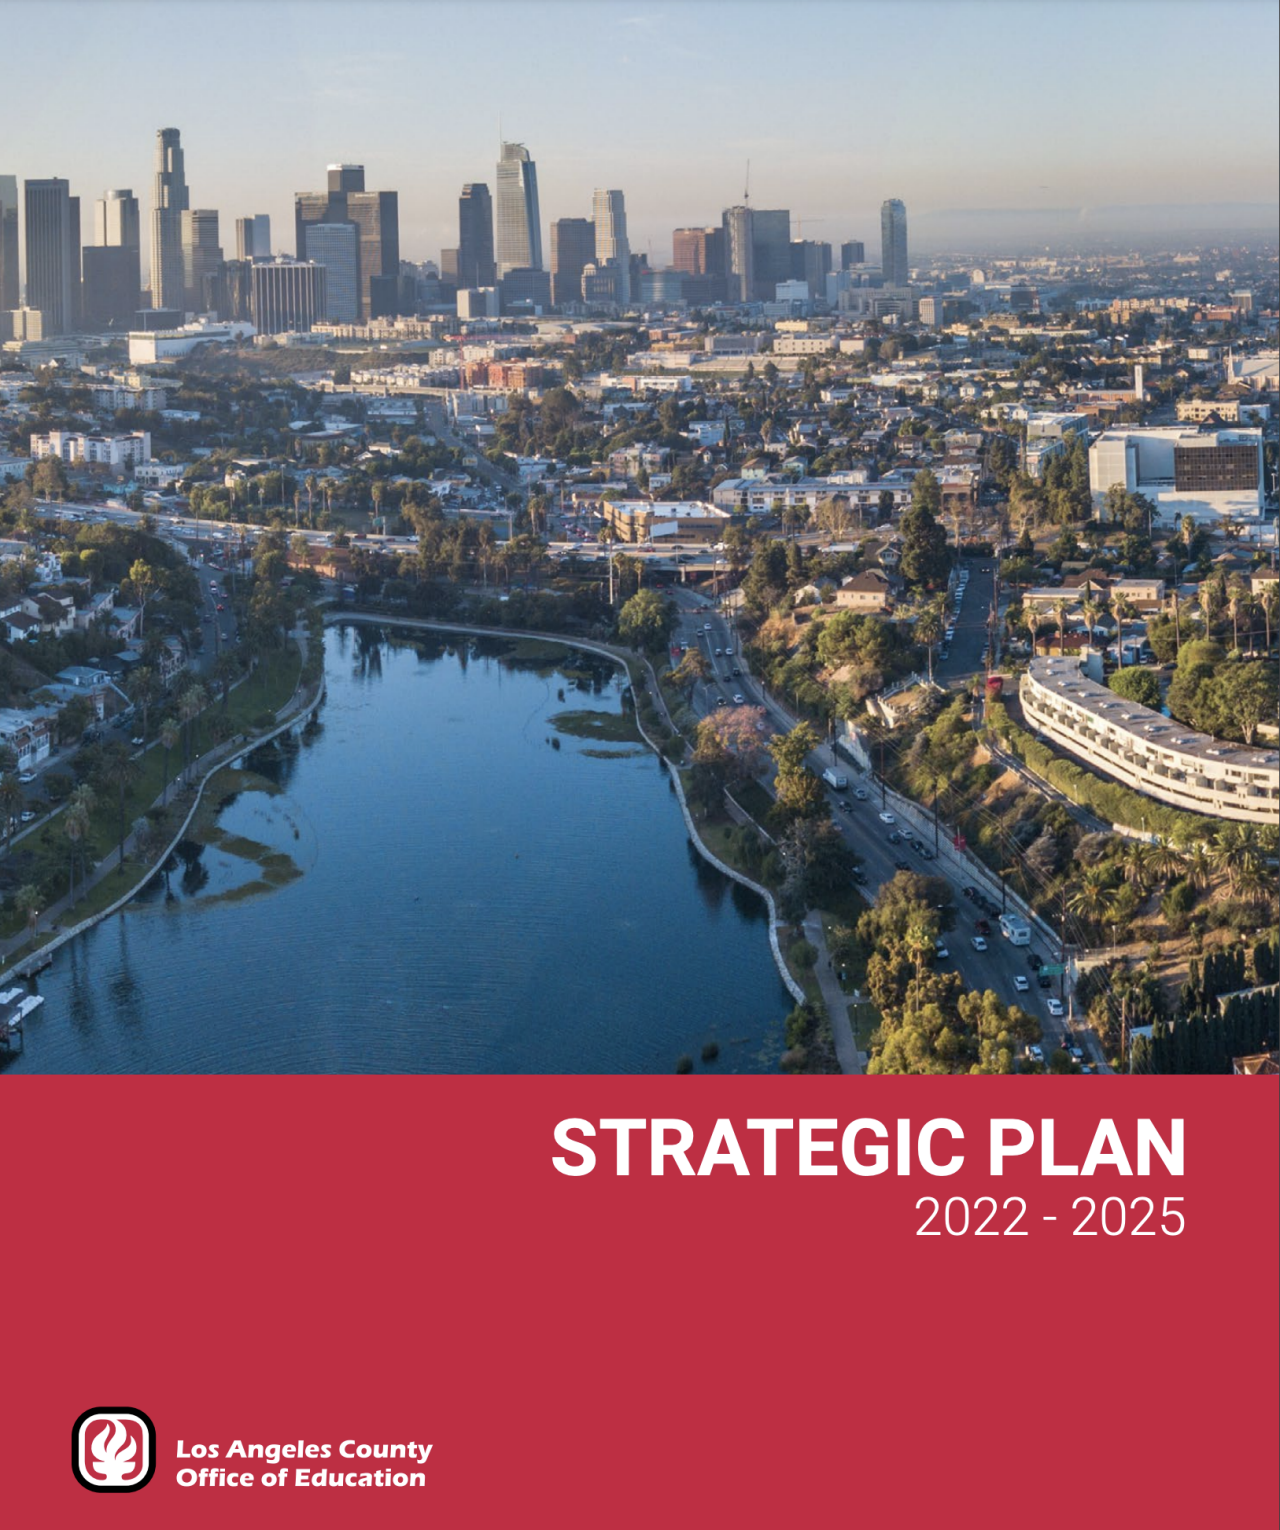 Photo of LA skyline in the background, with water, trees, homes and roads and title that says "Strategic Plan."